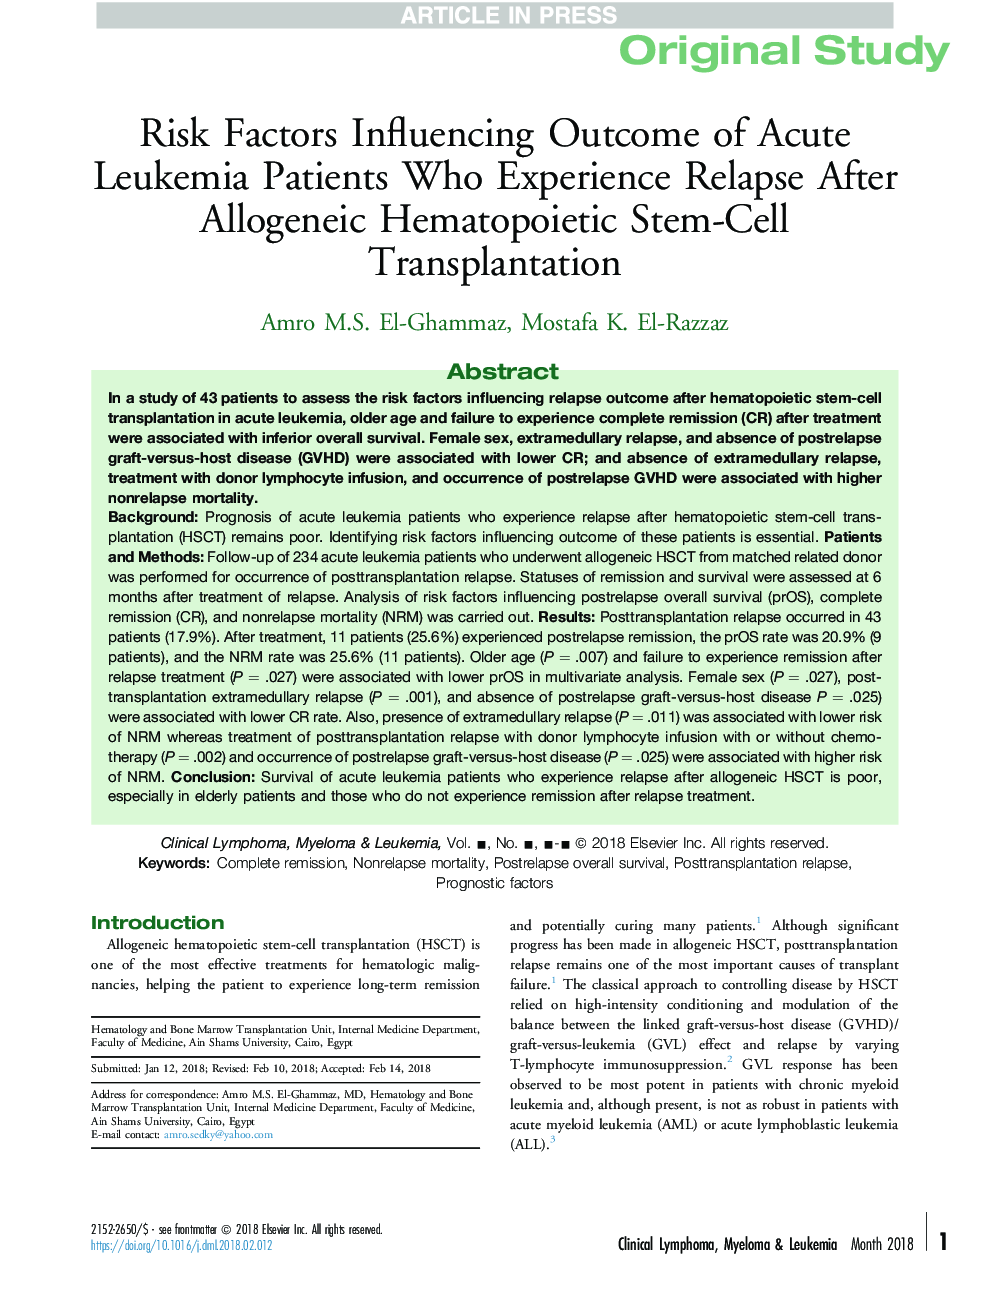 Risk Factors Influencing Outcome of Acute Leukemia Patients Who Experience Relapse After Allogeneic Hematopoietic Stem-Cell Transplantation